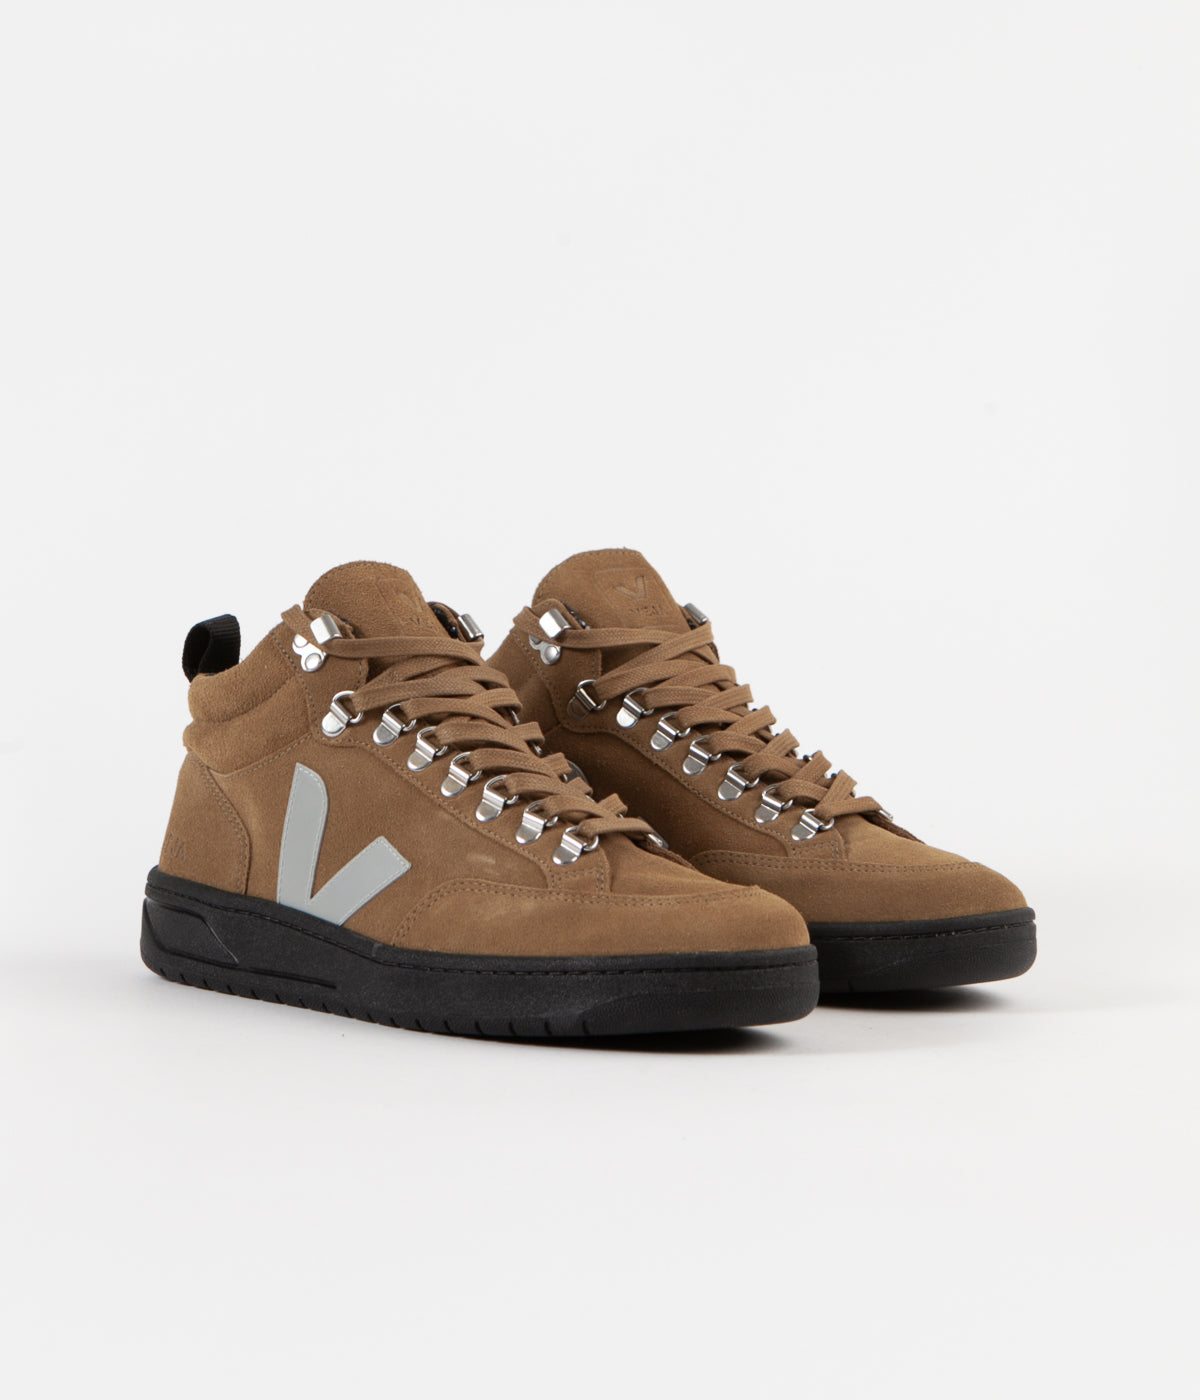 Veja Roraima Suede Shoes - Tent / Oxford Grey / Black Sole | Always in